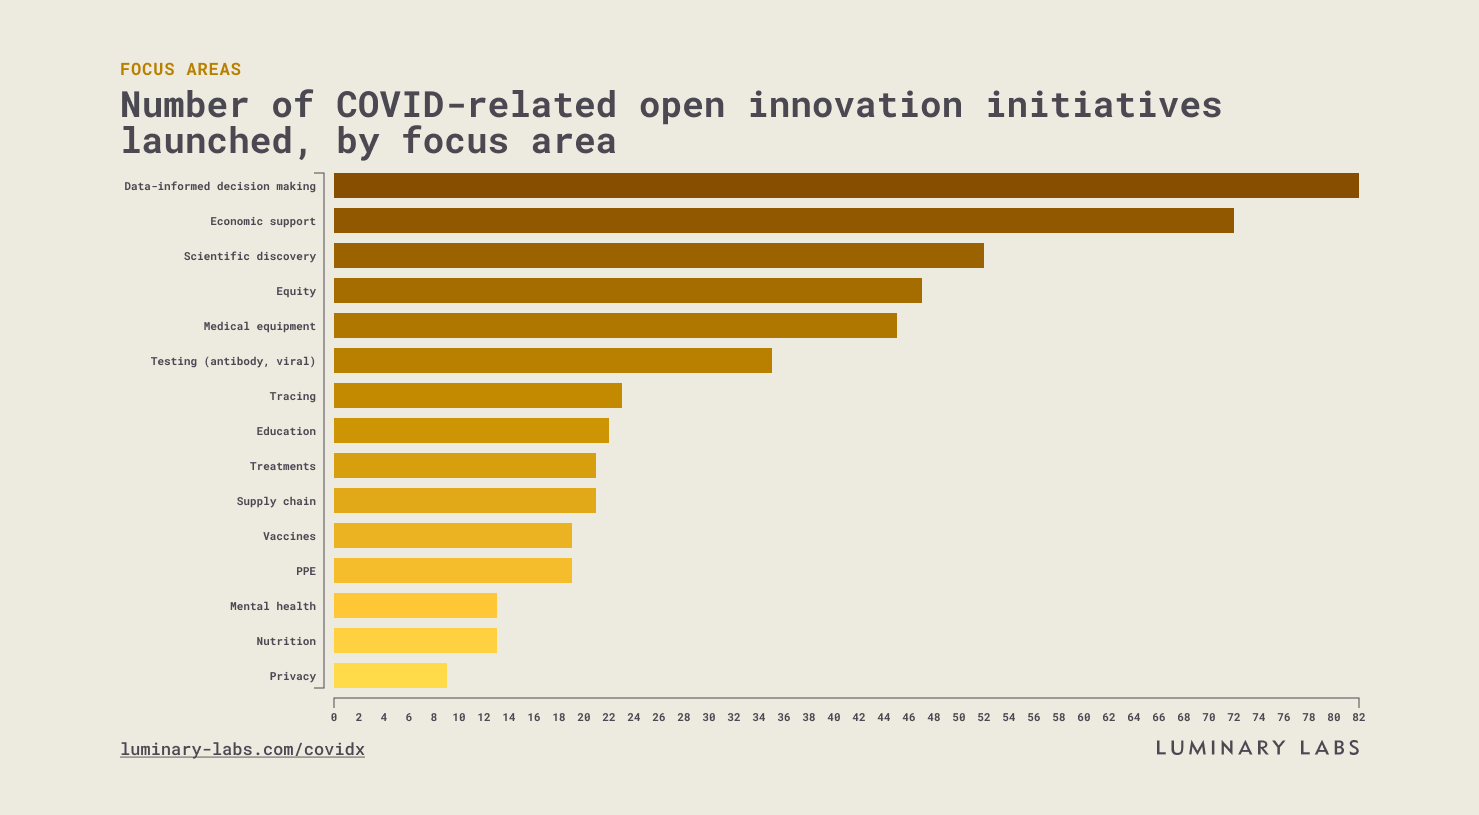 Number of COVID-related open innovation initiatives launched, by focus area